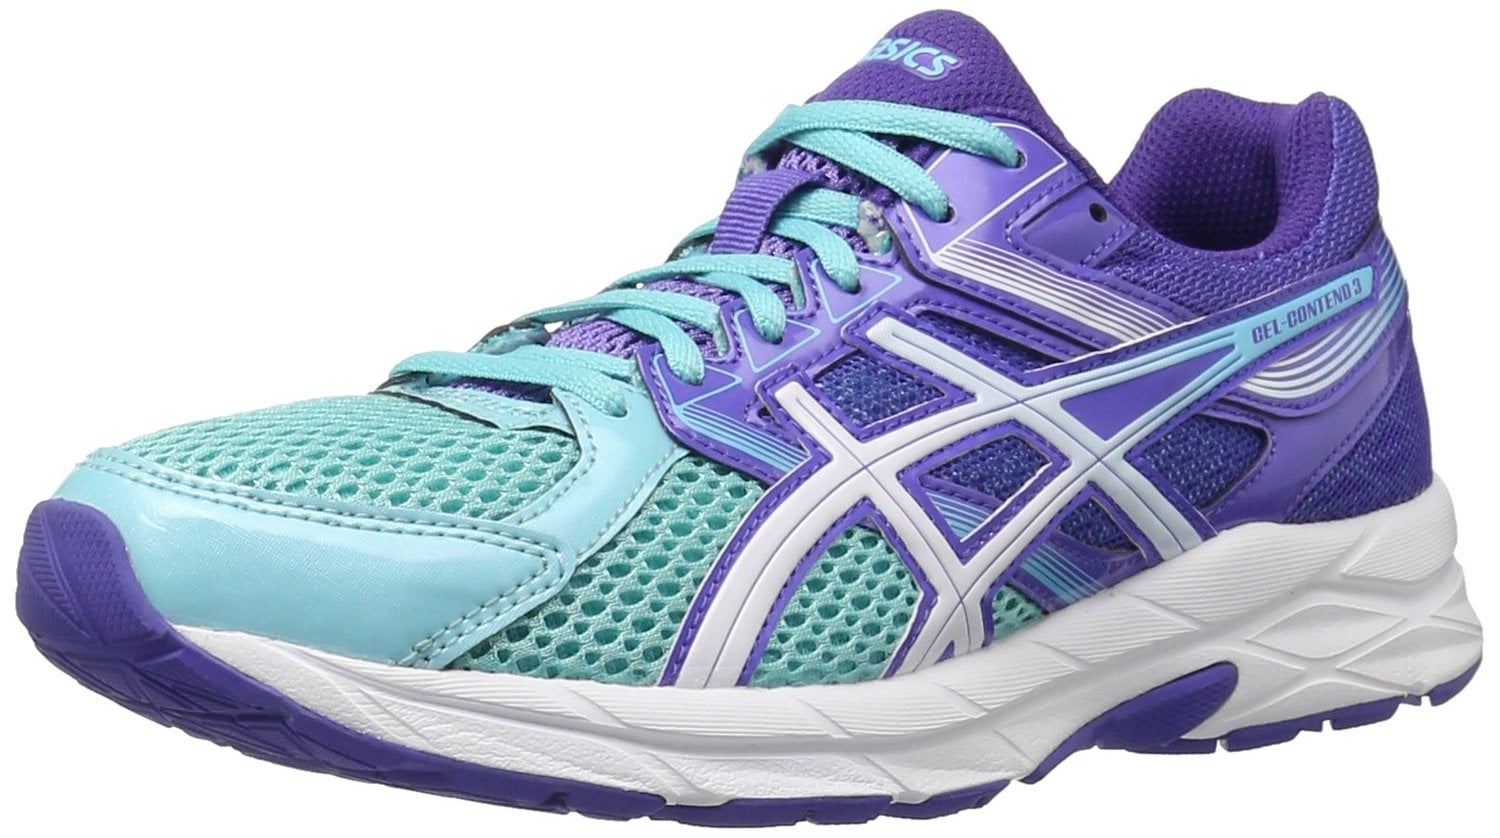 Asics Women's GEL-Contend 3 Running Shoe | Fuel Your Sneaker Addiction by  Amazon Priming These Bad Boys | POPSUGAR Fitness Photo 4